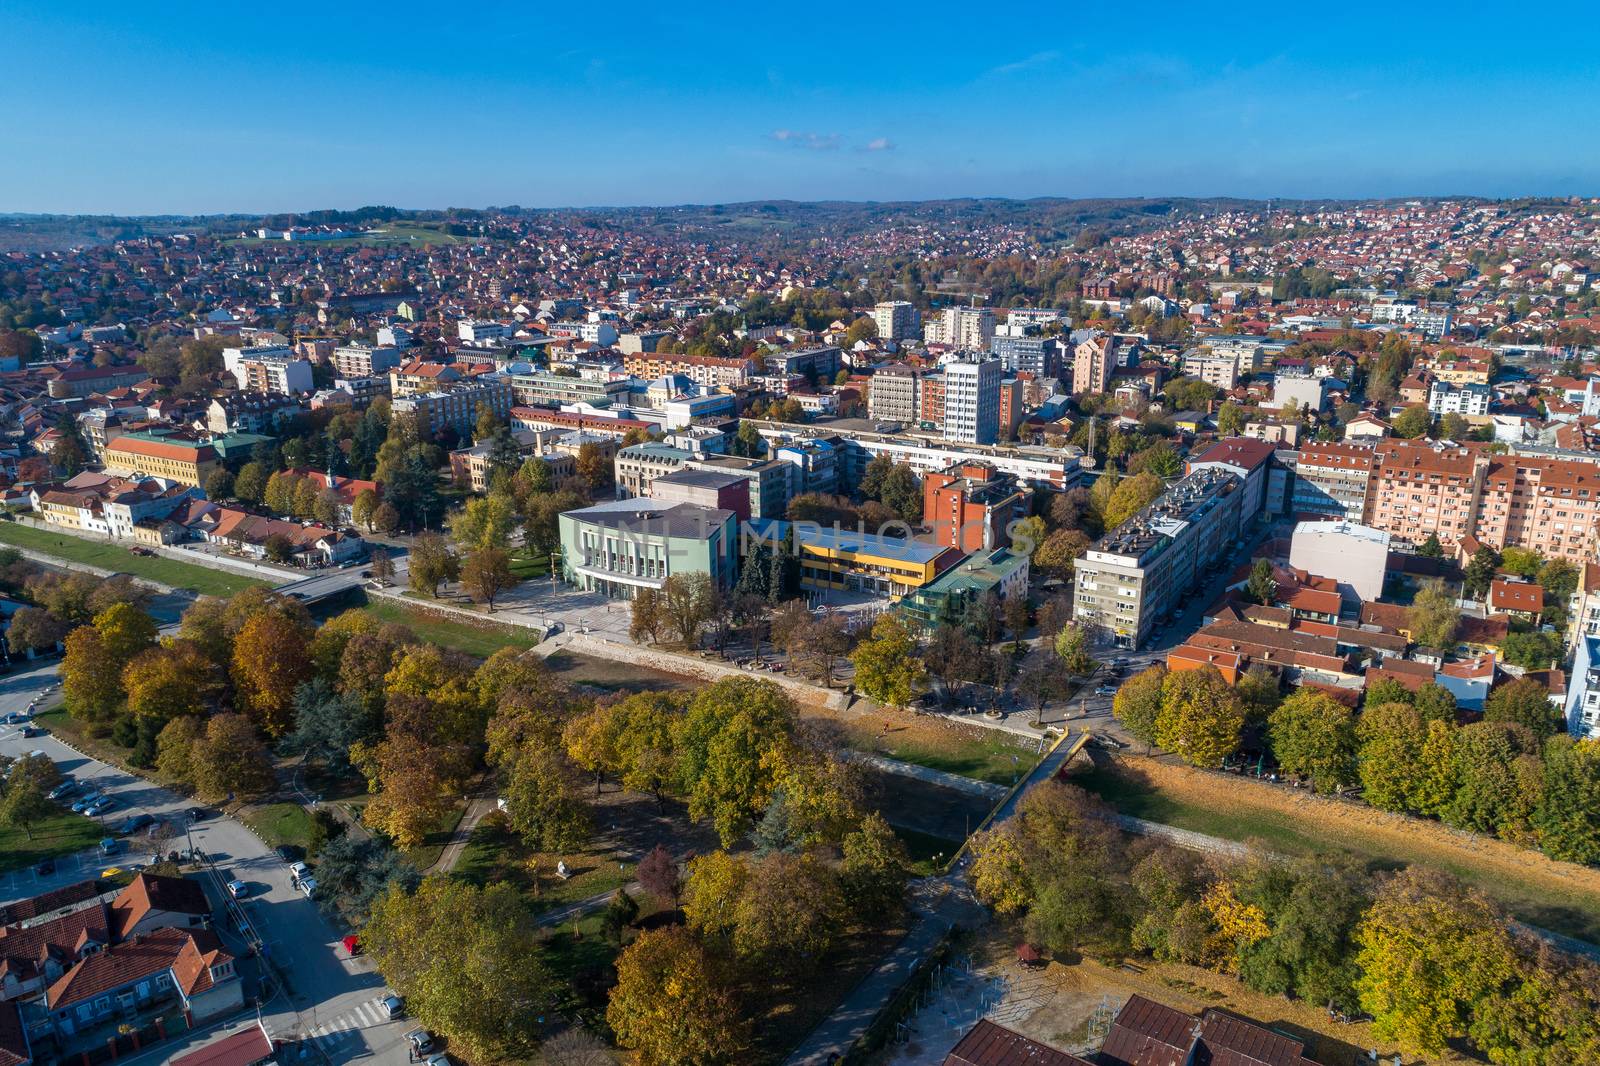 Valjevo - panorama of city in Serbia. Aerial drone view administrative center of the Kolubara District in Western Serbia